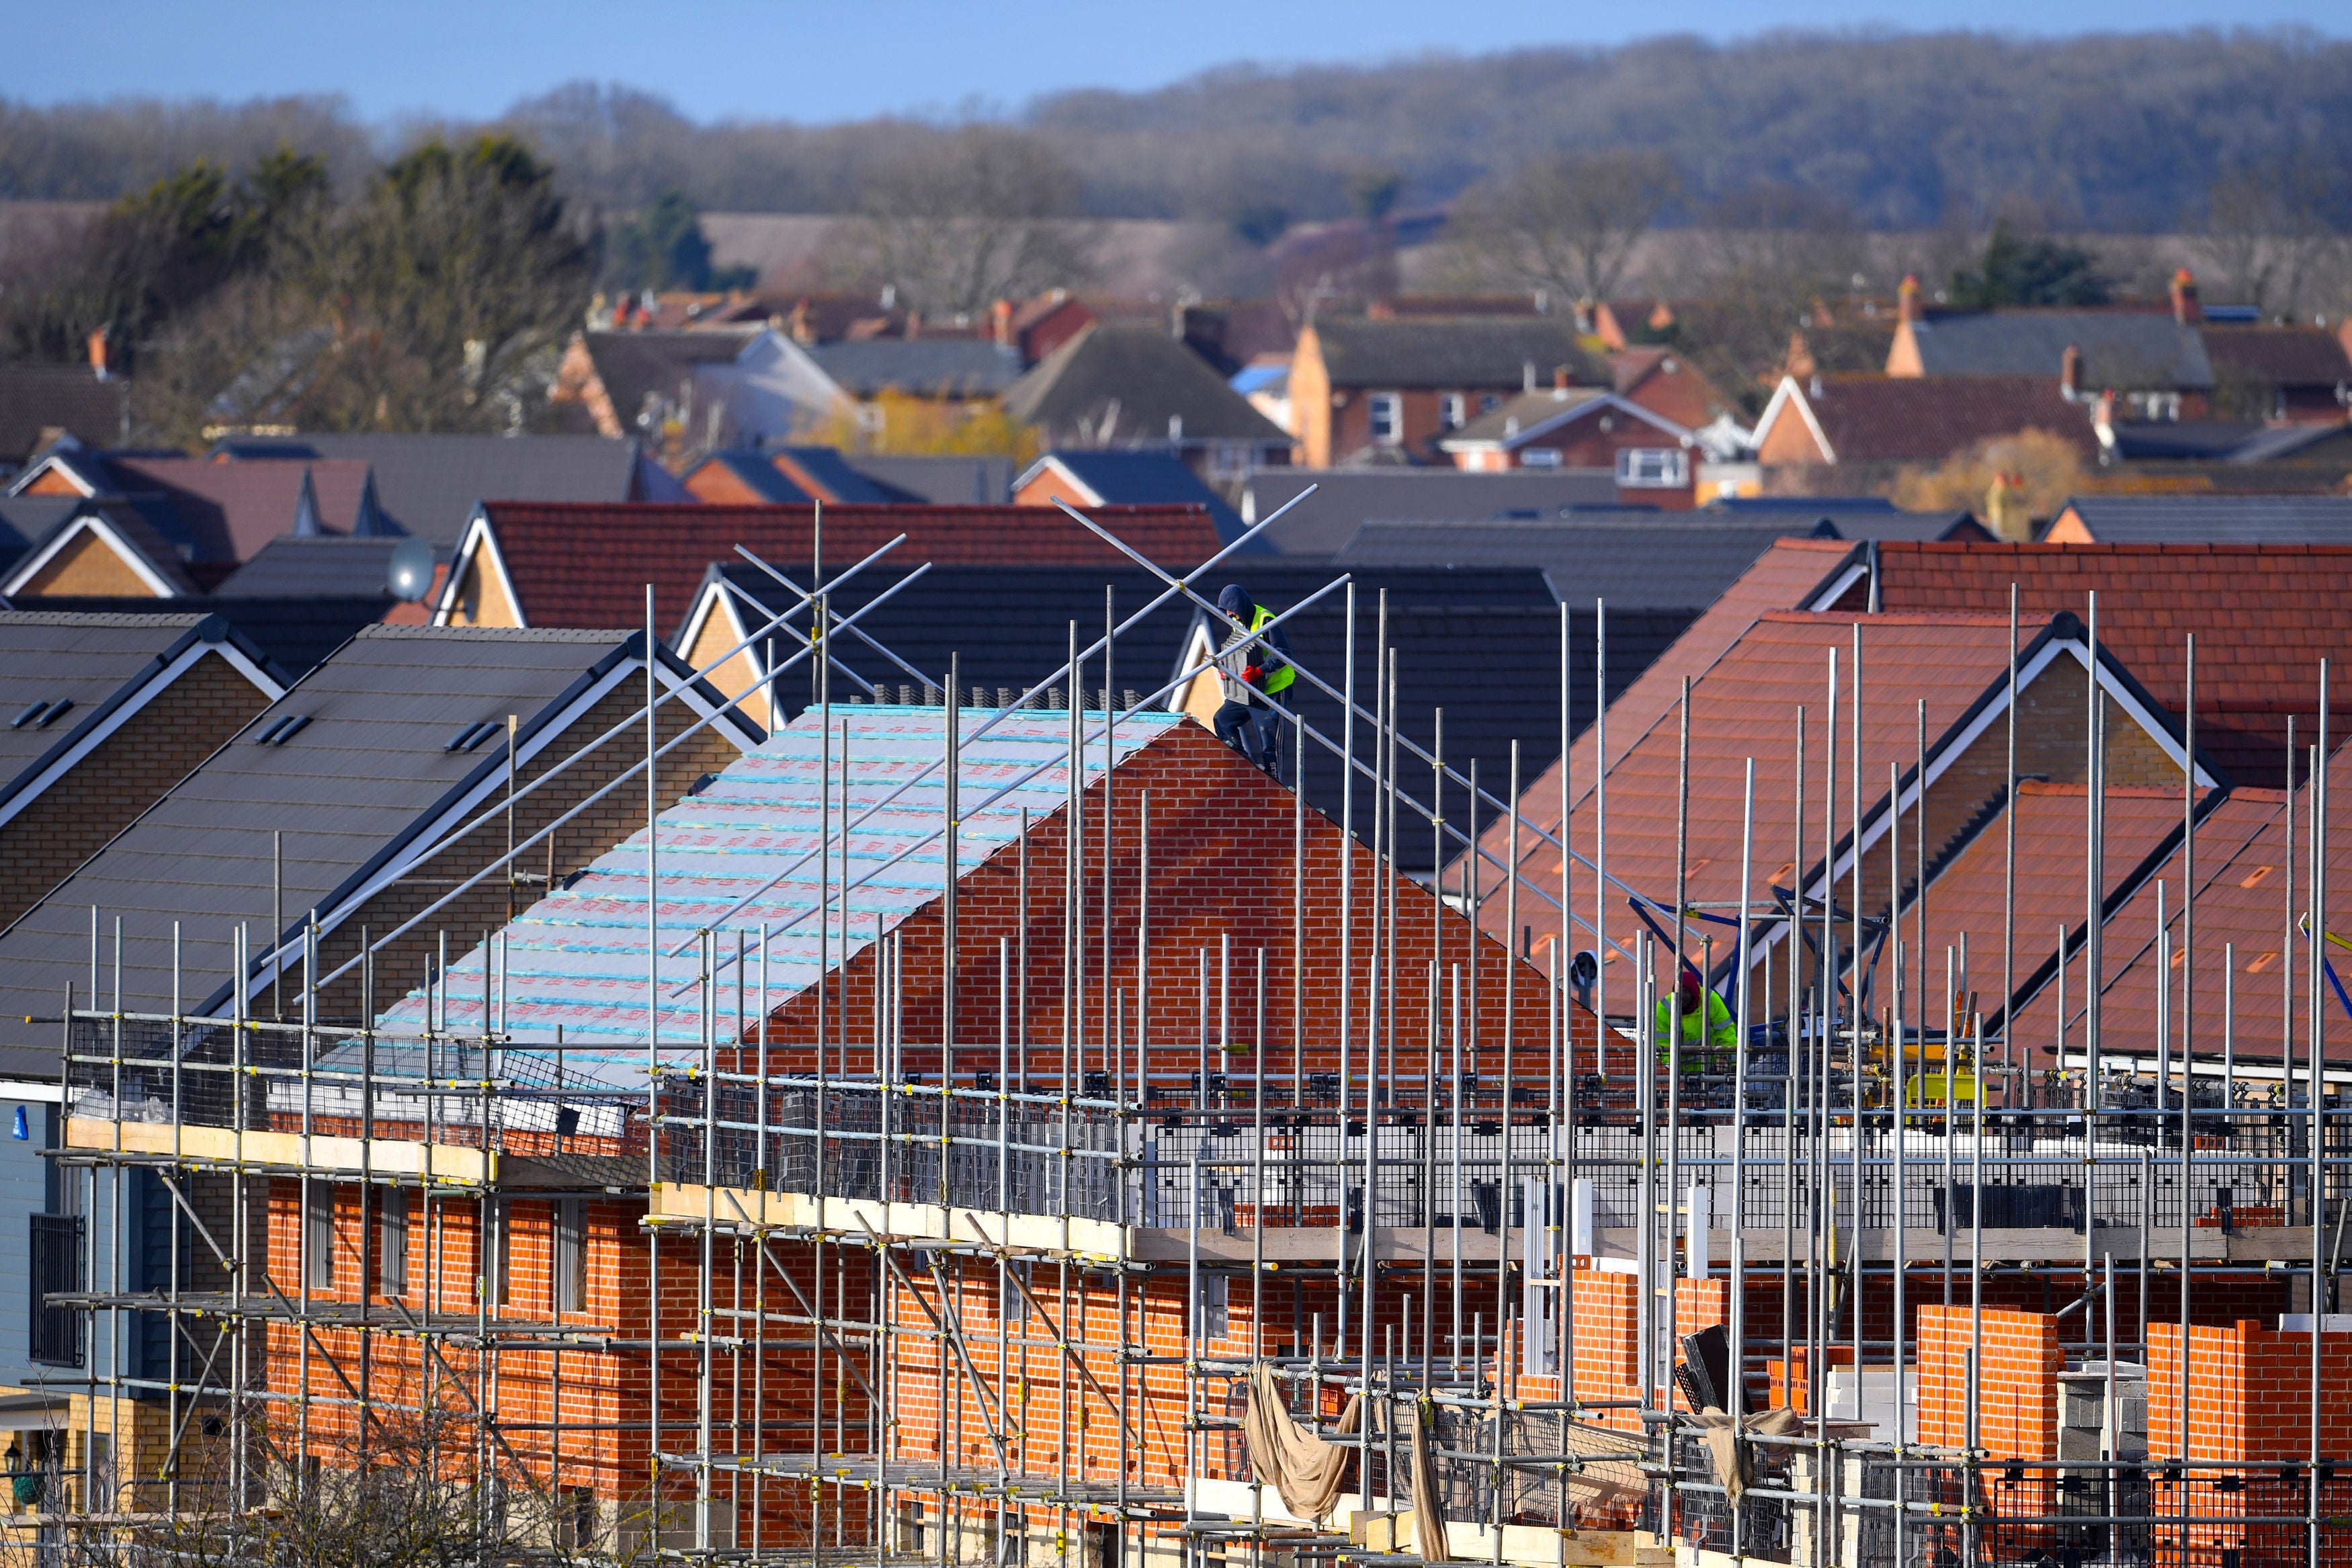 The 300,000 figure is ‘dependent on how developers respond to market conditions’, MPs were told